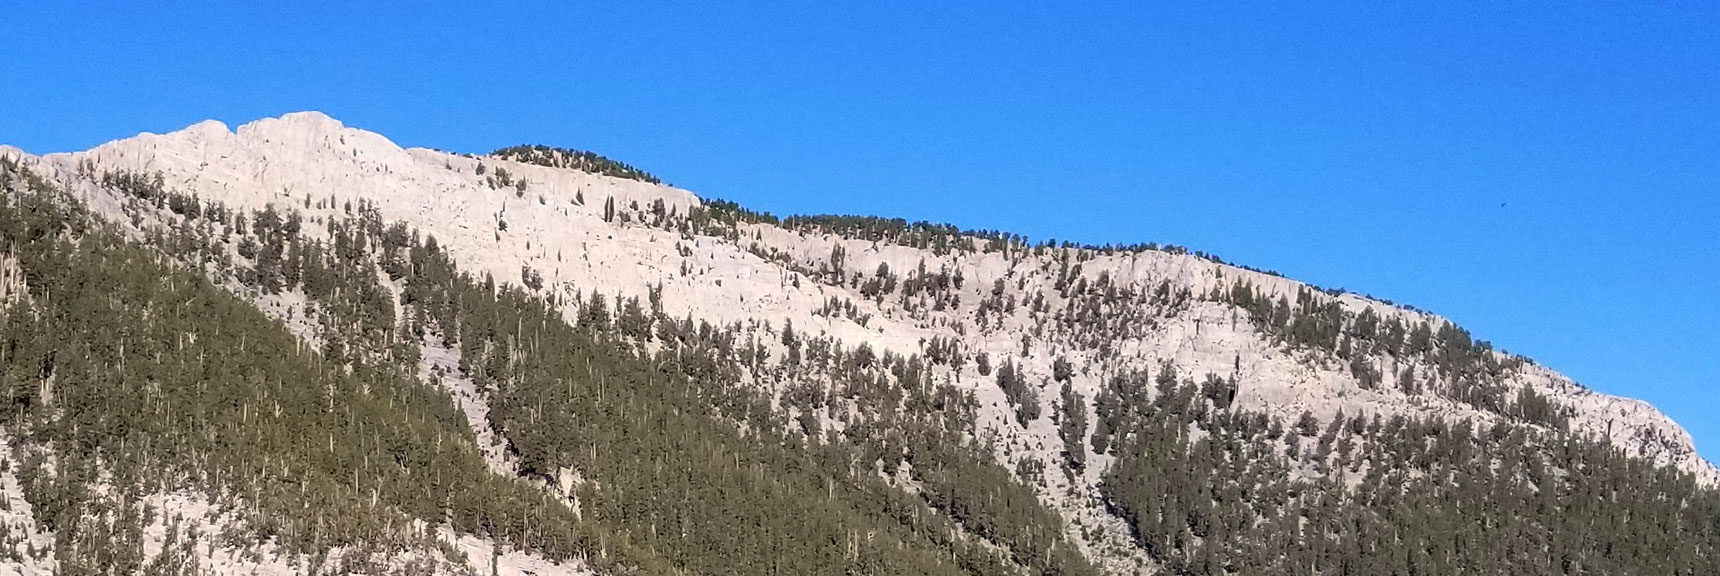 Closer View of Mummy Mountain Showing the Final Approach and Summit